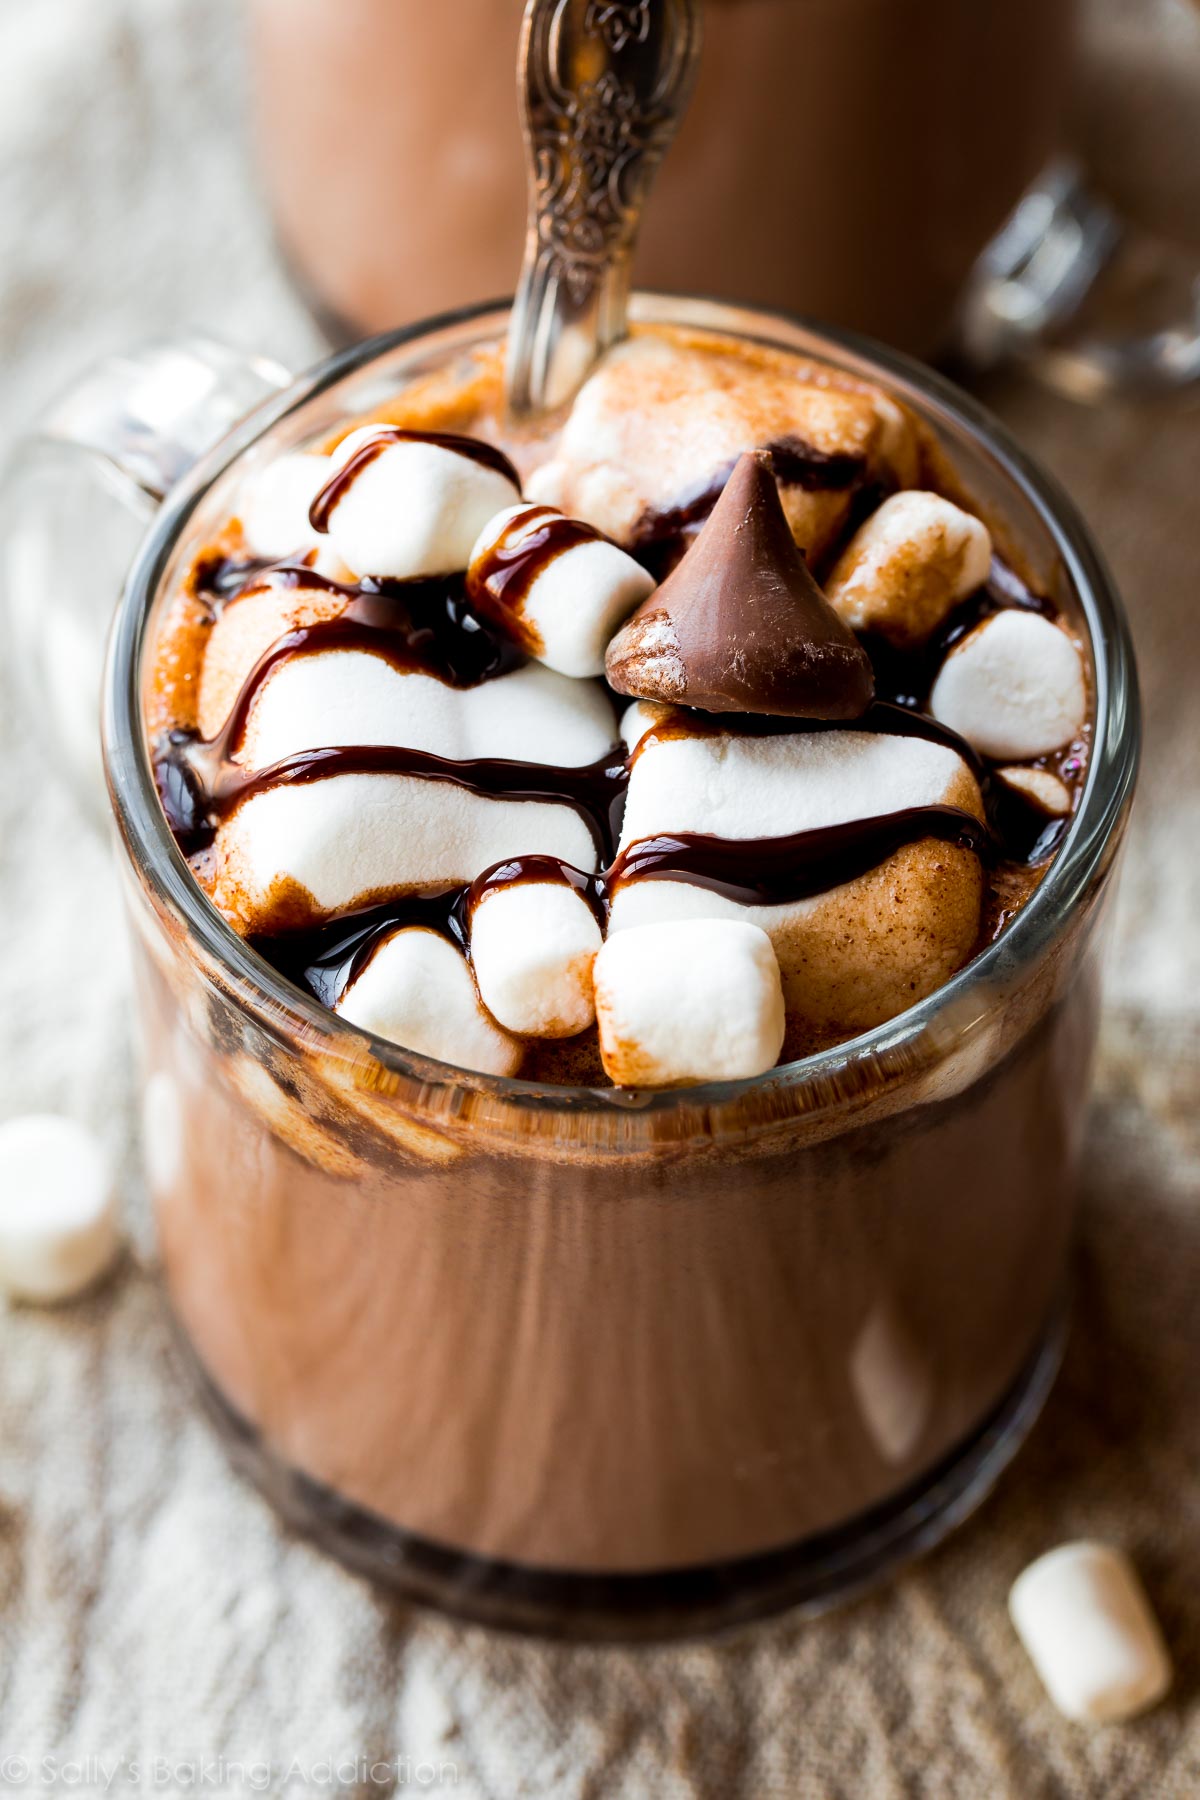 Creamy, rich, and decadent slow cooker hot chocolate made in the crockpot! Recipe on sallysbakingaddiction.com